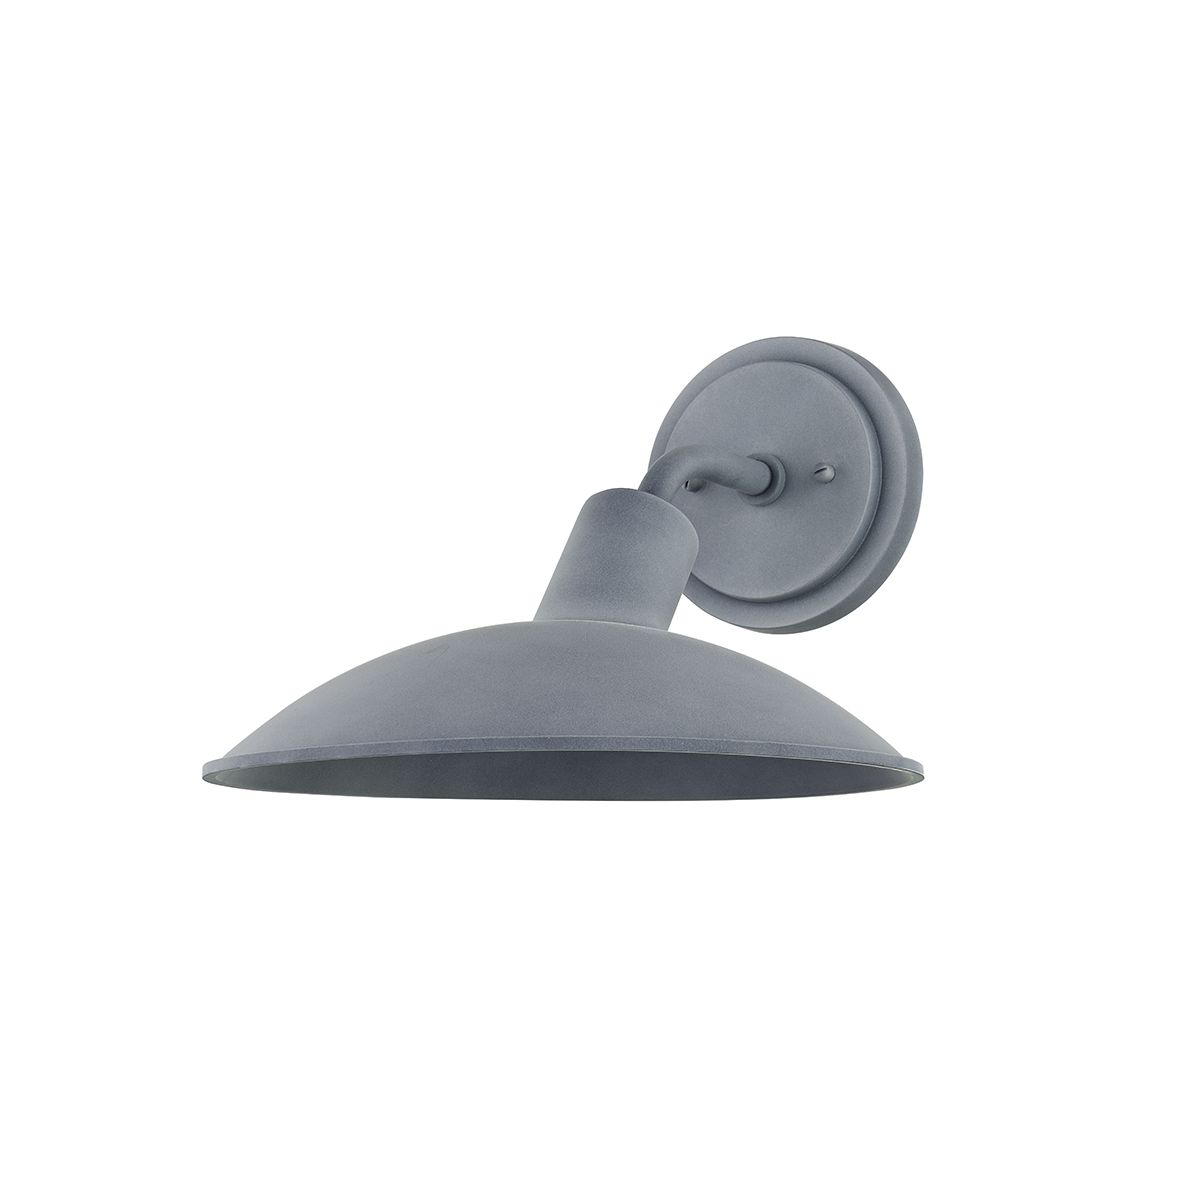 Troy OTIS 1 LIGHT SMALL EXTERIOR WALL SCONCE B8812 Outdoor l Wall Troy Lighting WEATHERED ZINC  